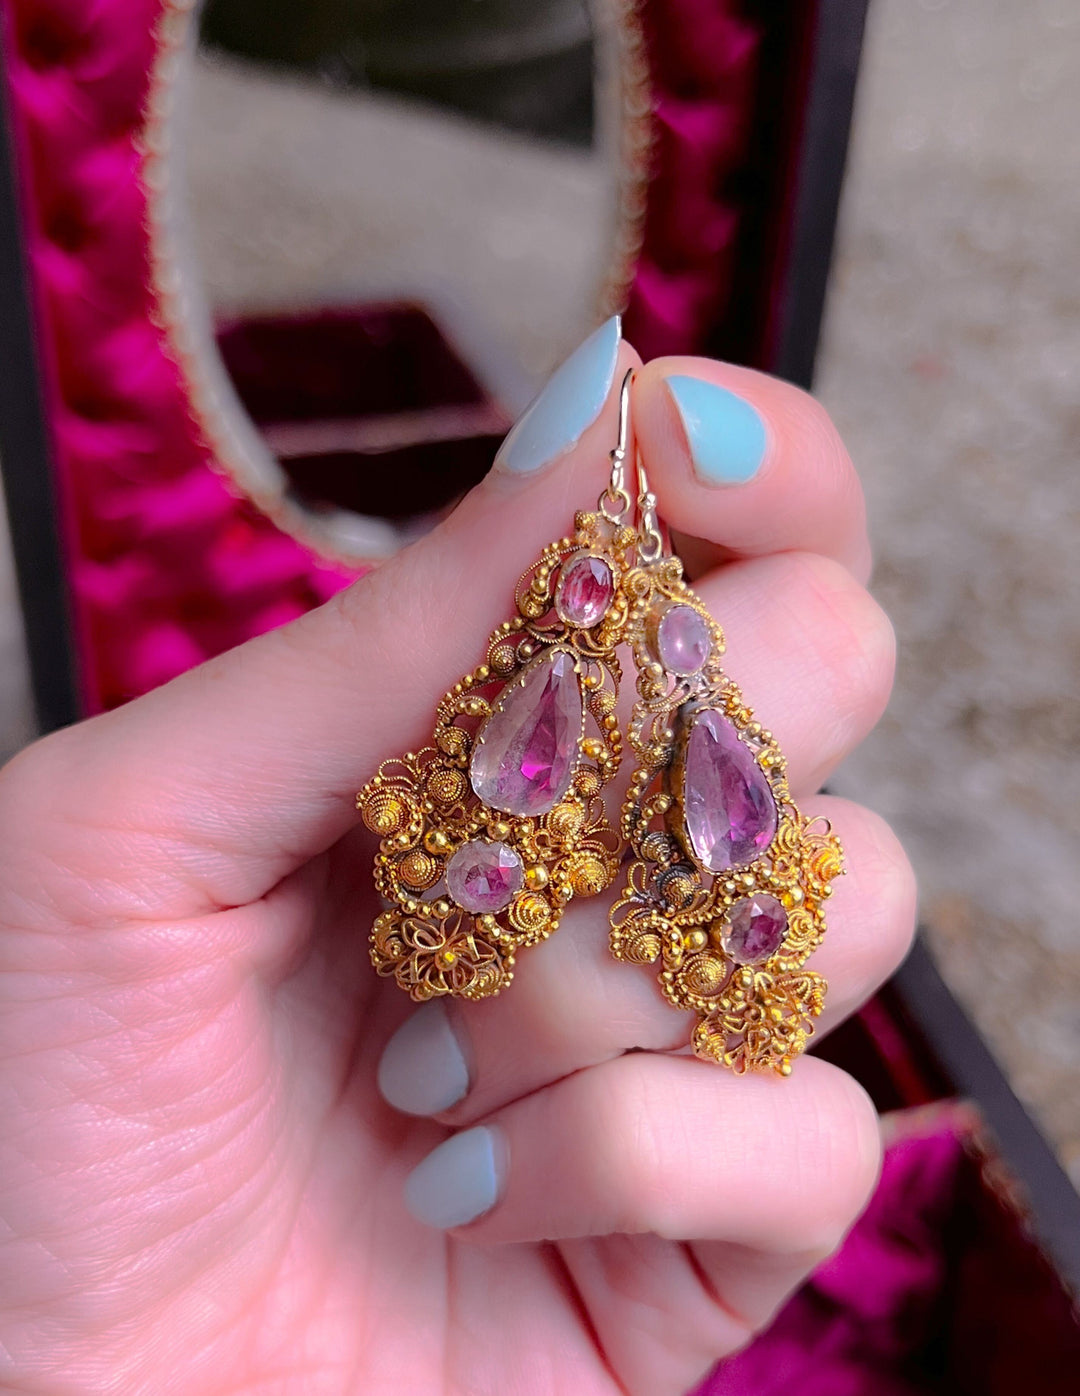 Sumptuous 15k Georgian Cannetille Earrings with Pink Topaz